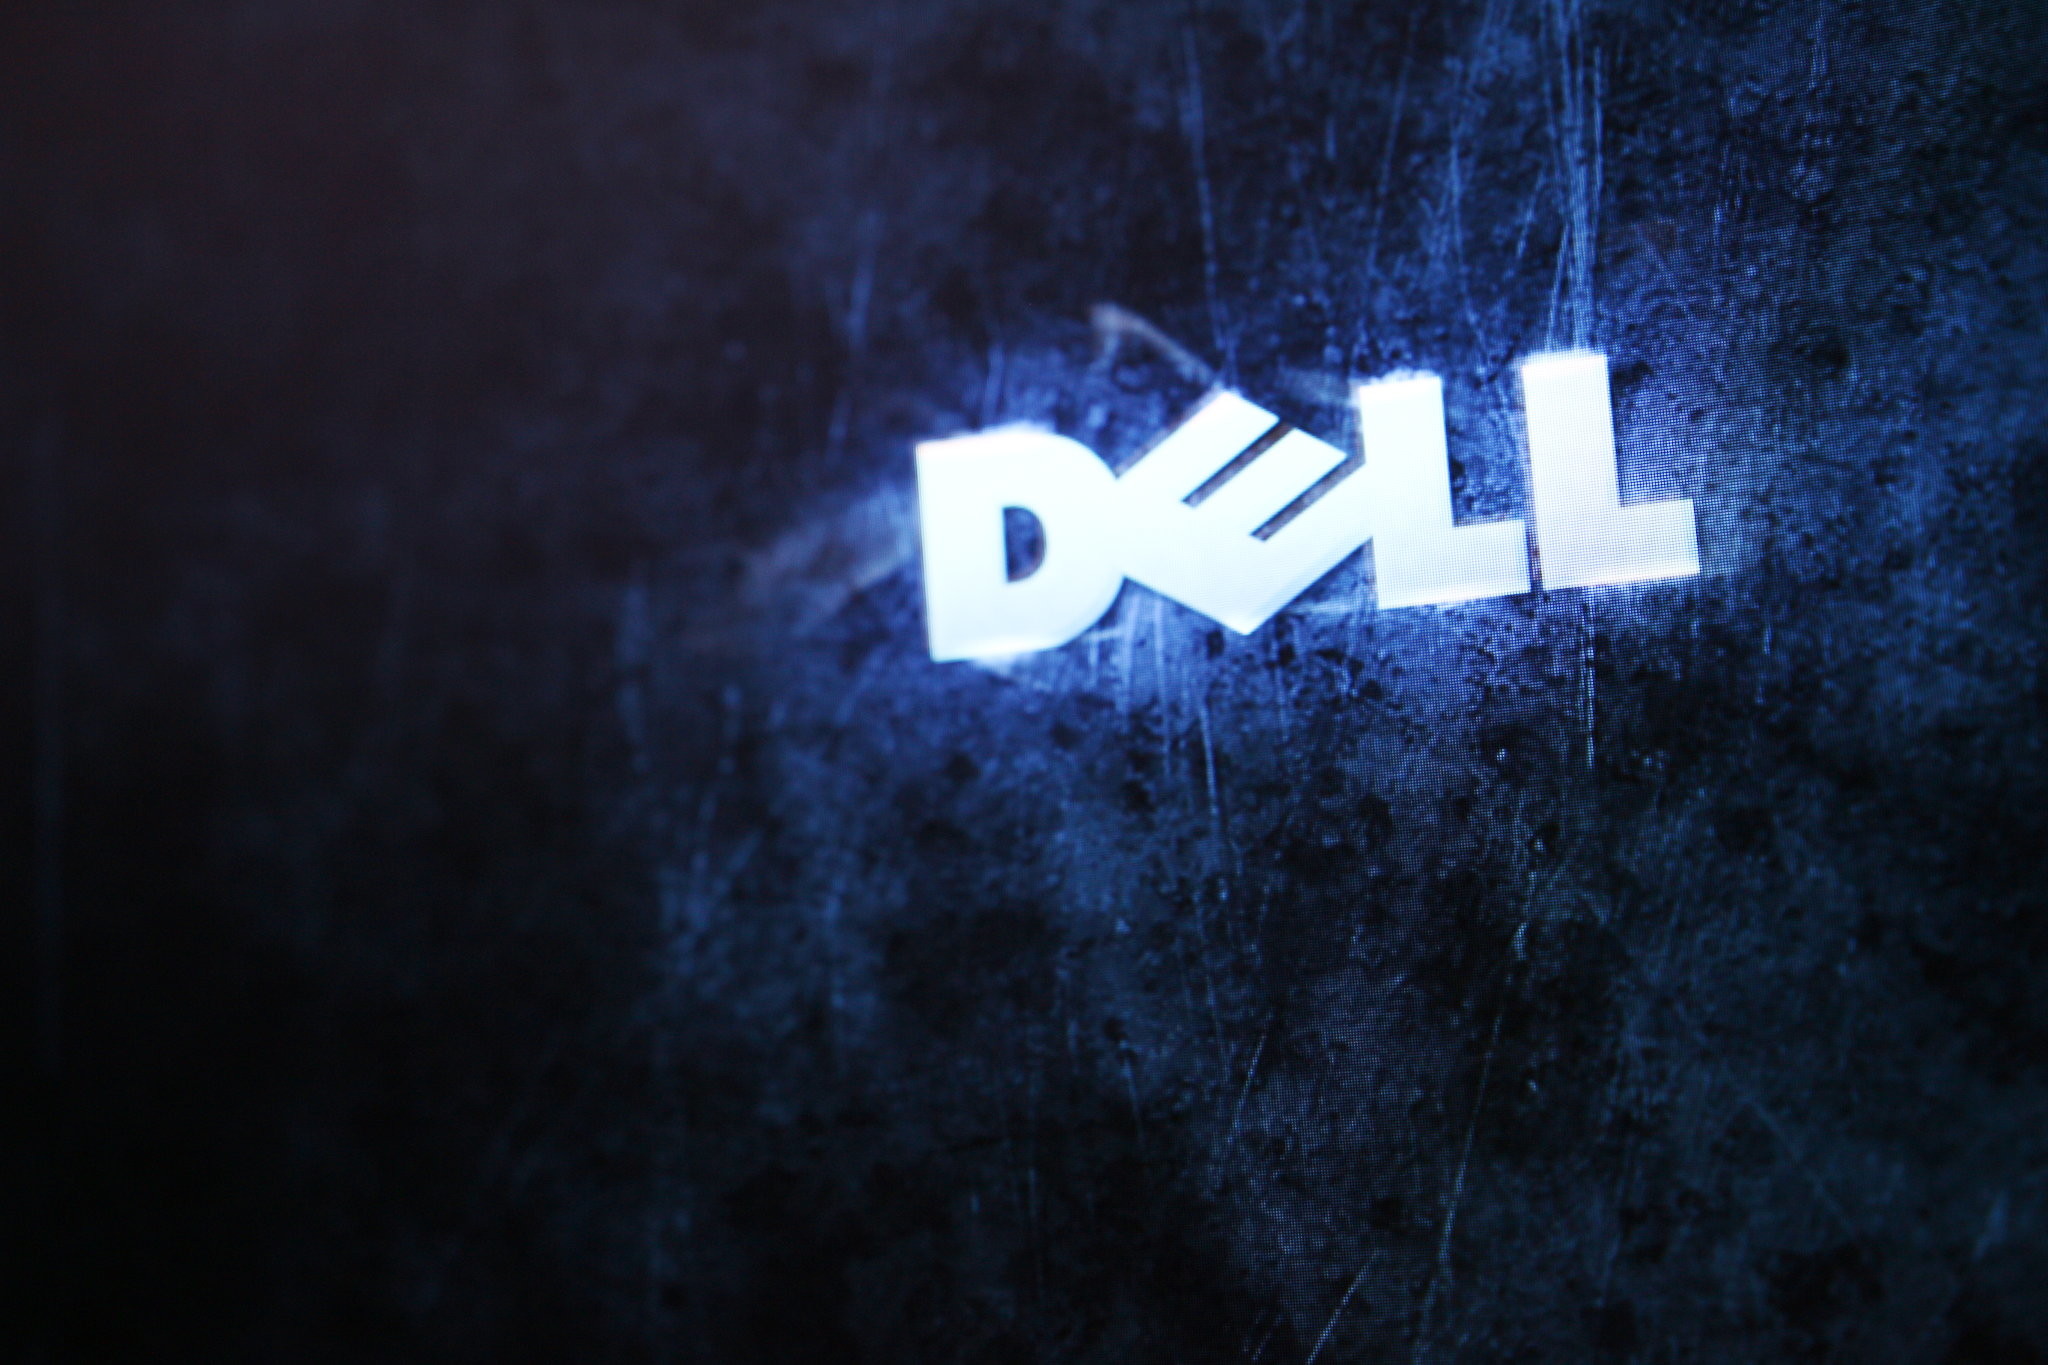 2048x1365 Dell Wallpapers HD For Desktop.